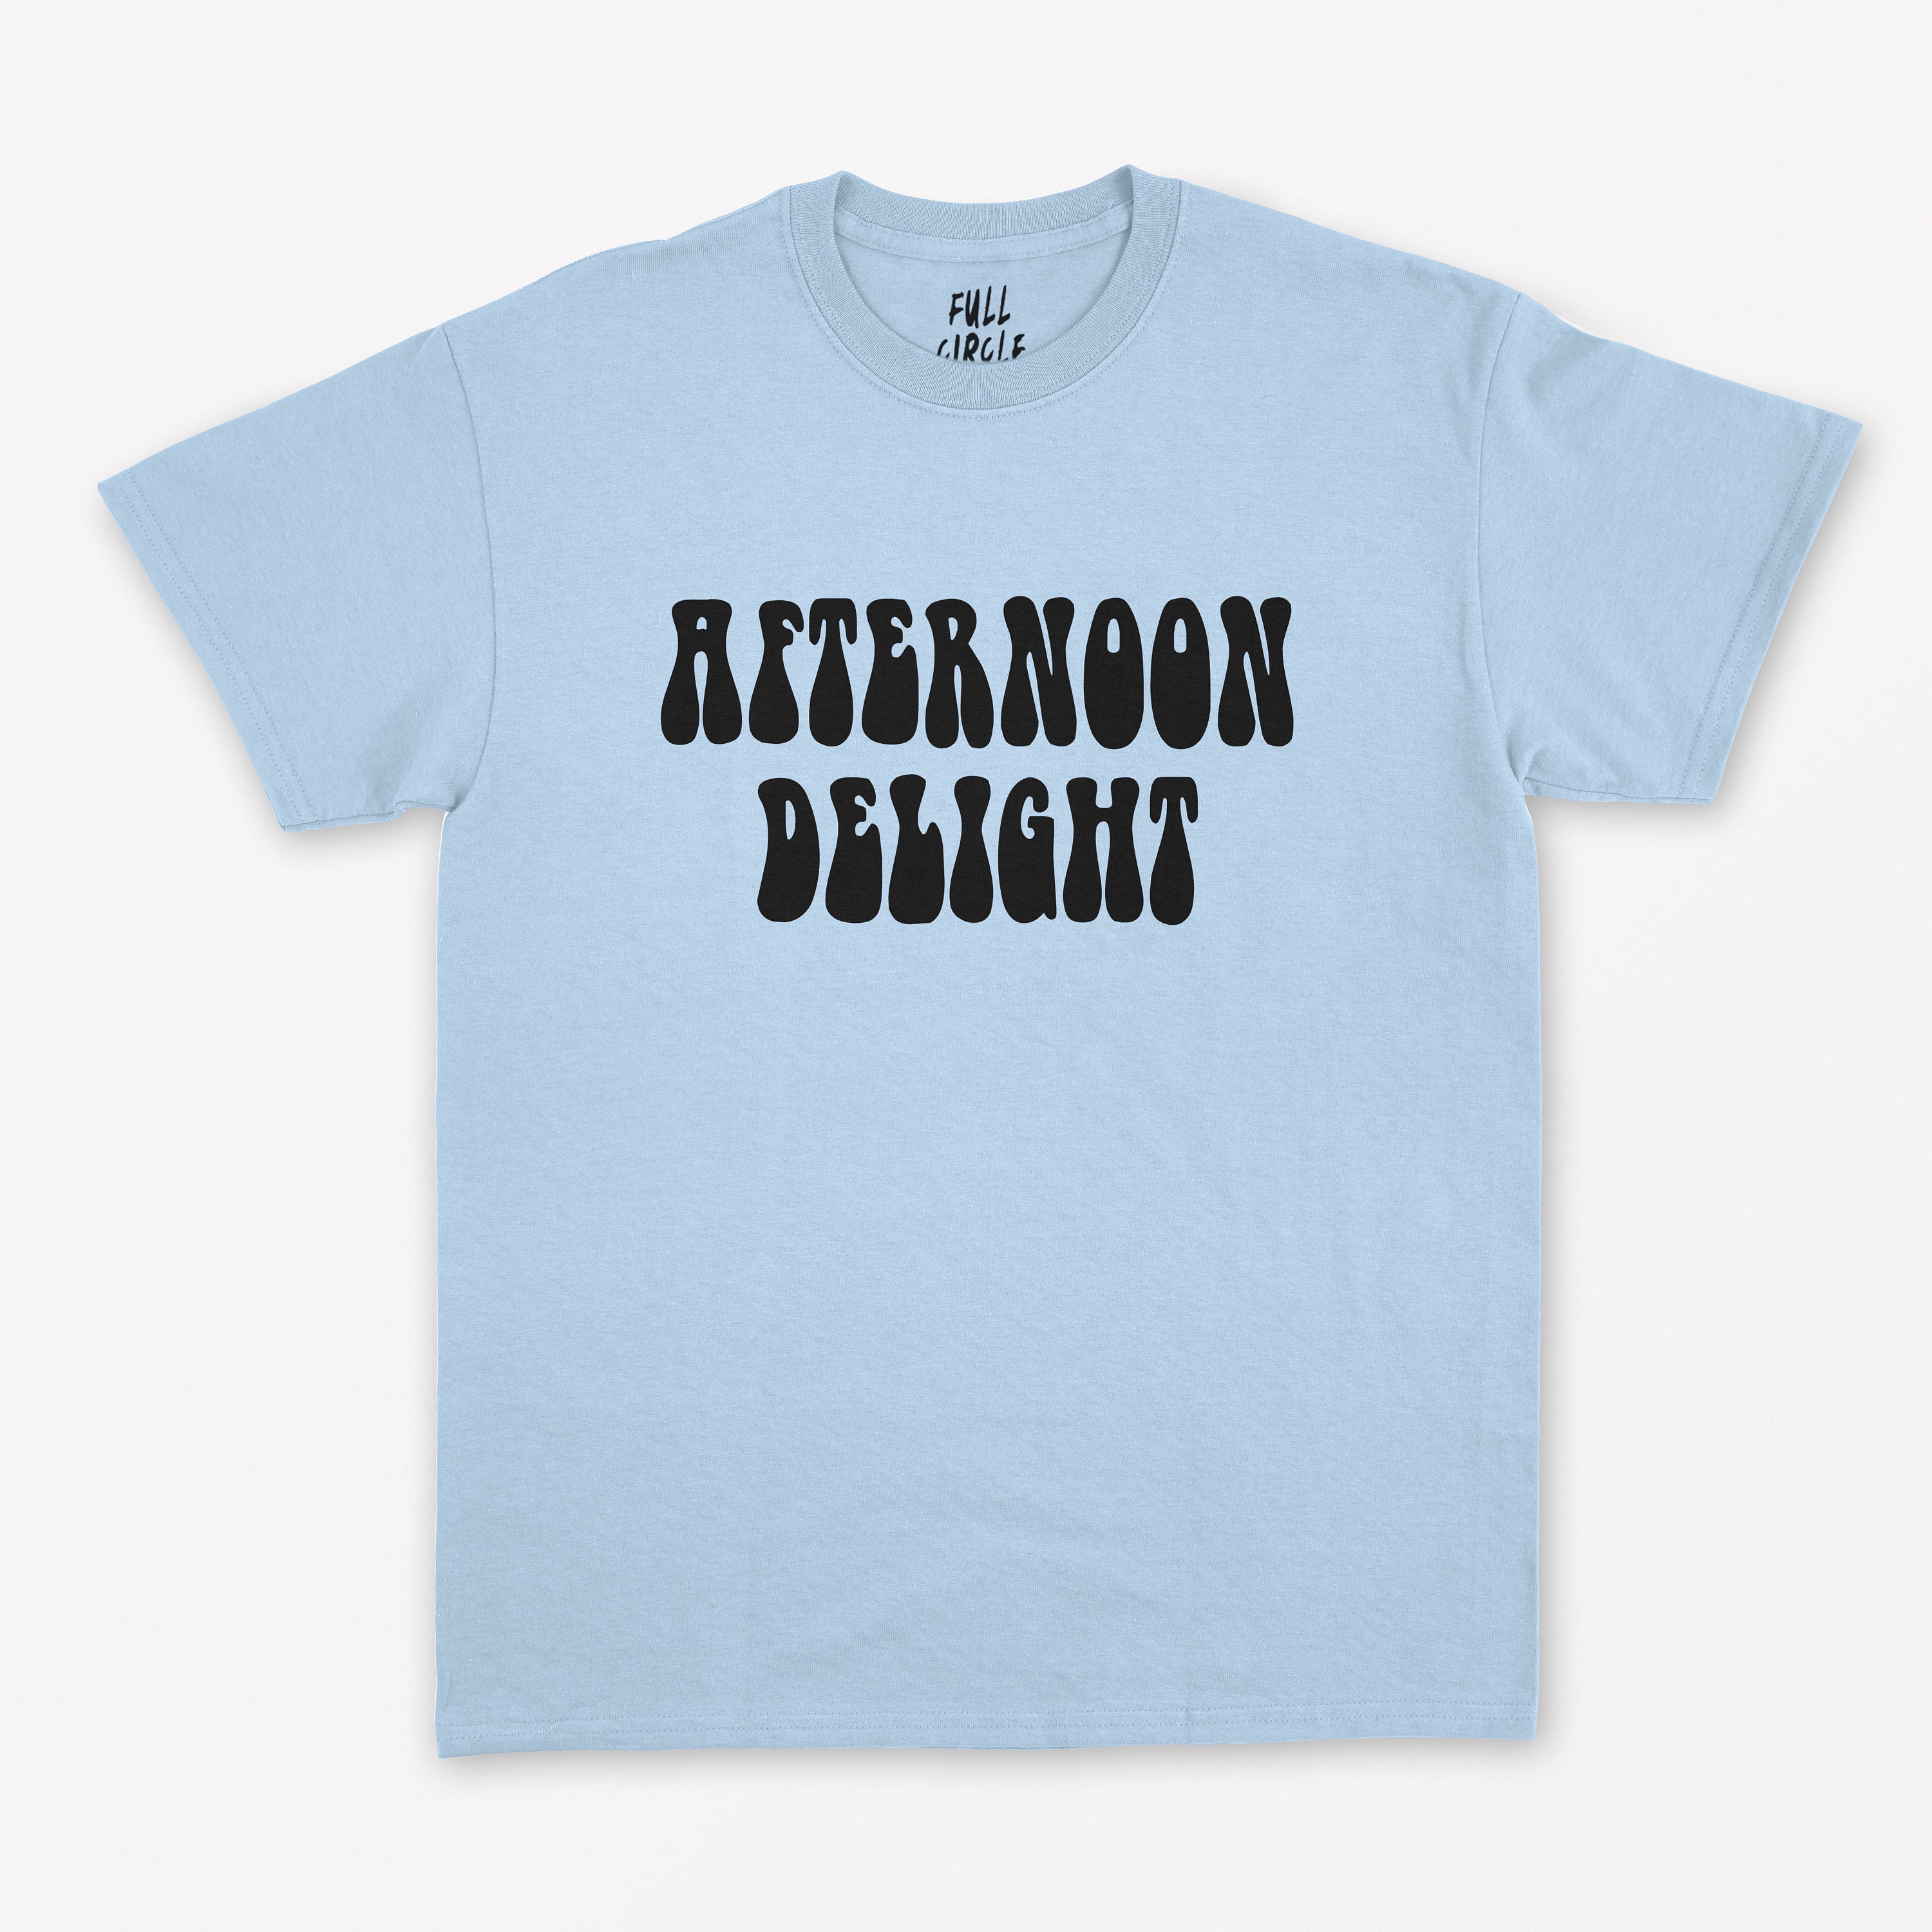 Discover Afternoon Delight T Shirt - Women's Shirt 60's hippy woodstock Vintage Graphic Tee Band Slogan Top hipster kawaii feminist grunge goth 1990s